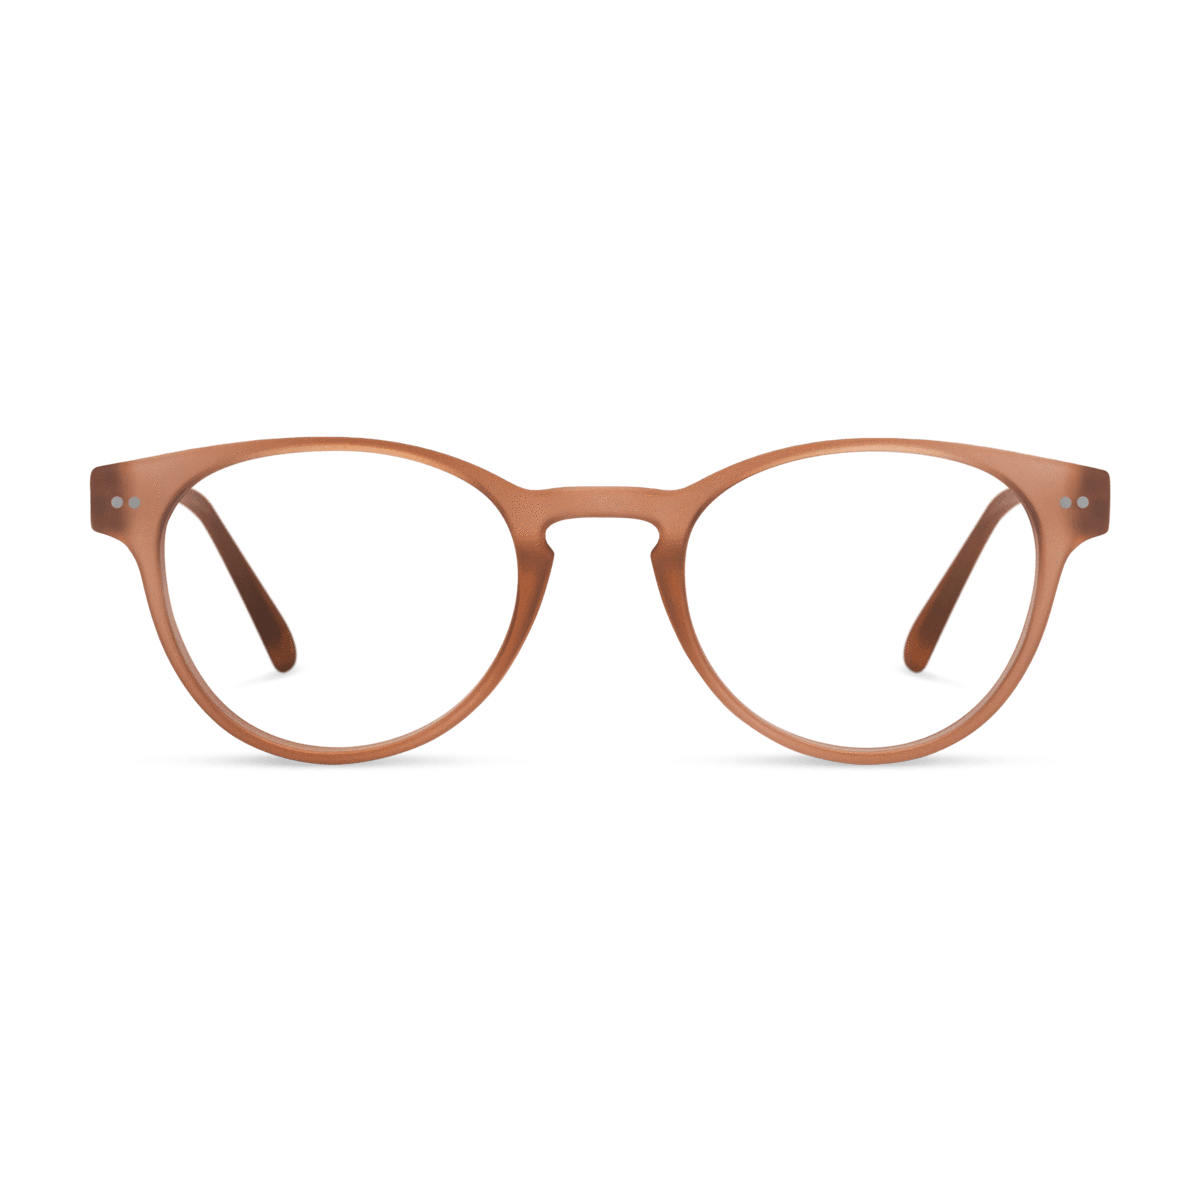 Abbey Readers READING GLASSES LOOK OPTIC Reader Champagne +1.00